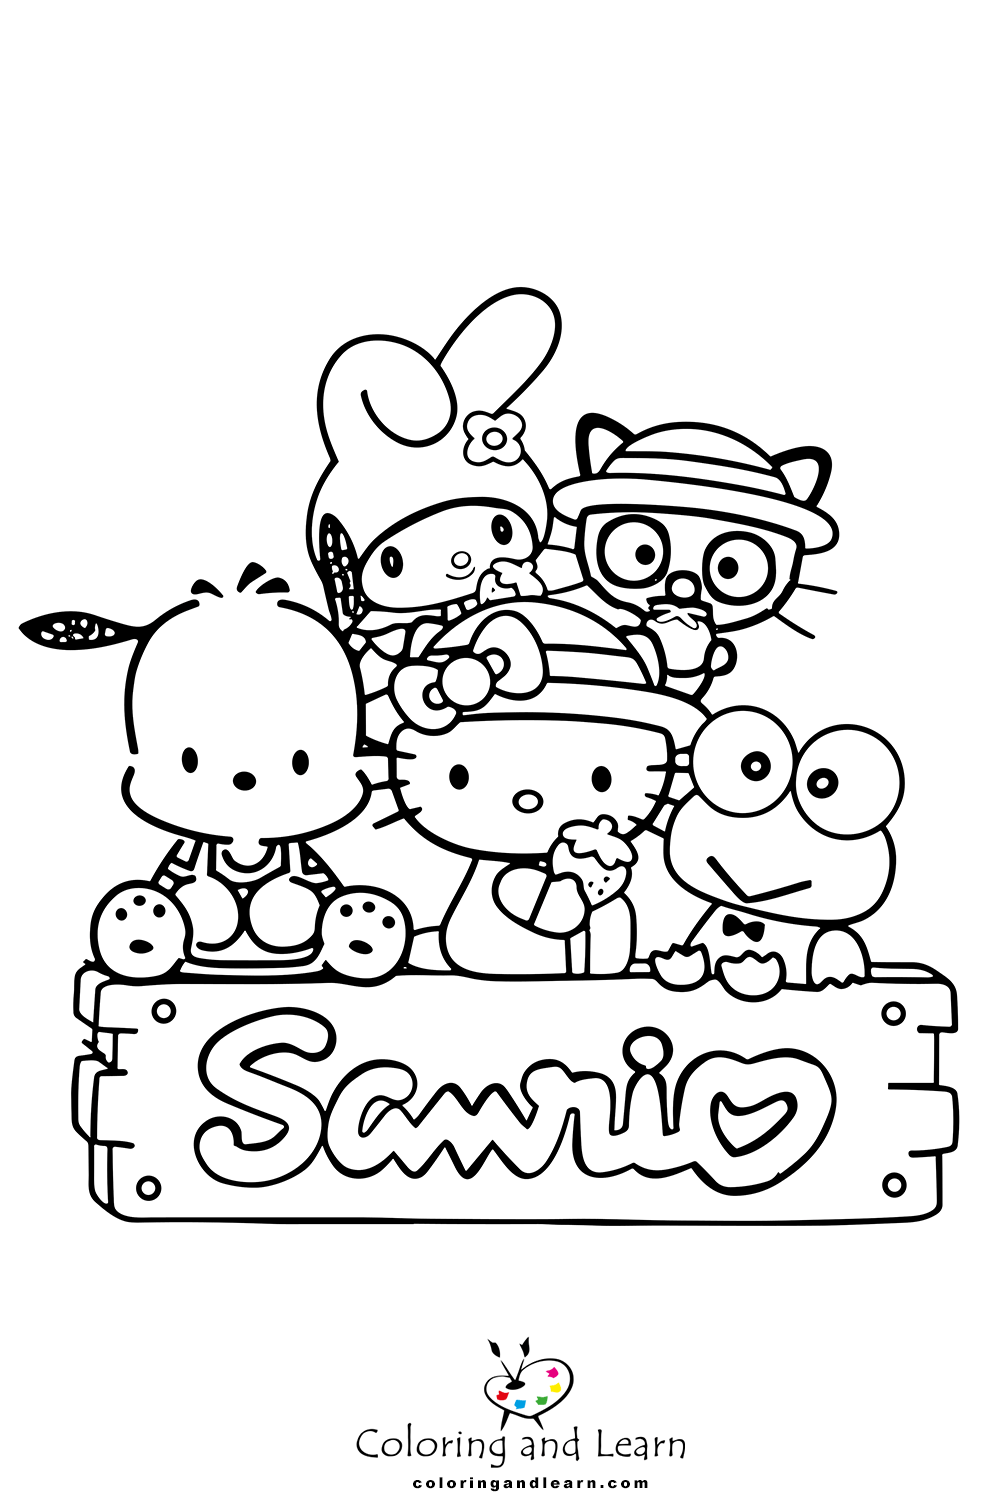 Sanrio Coloring Pages (2024) - Coloring and Learn